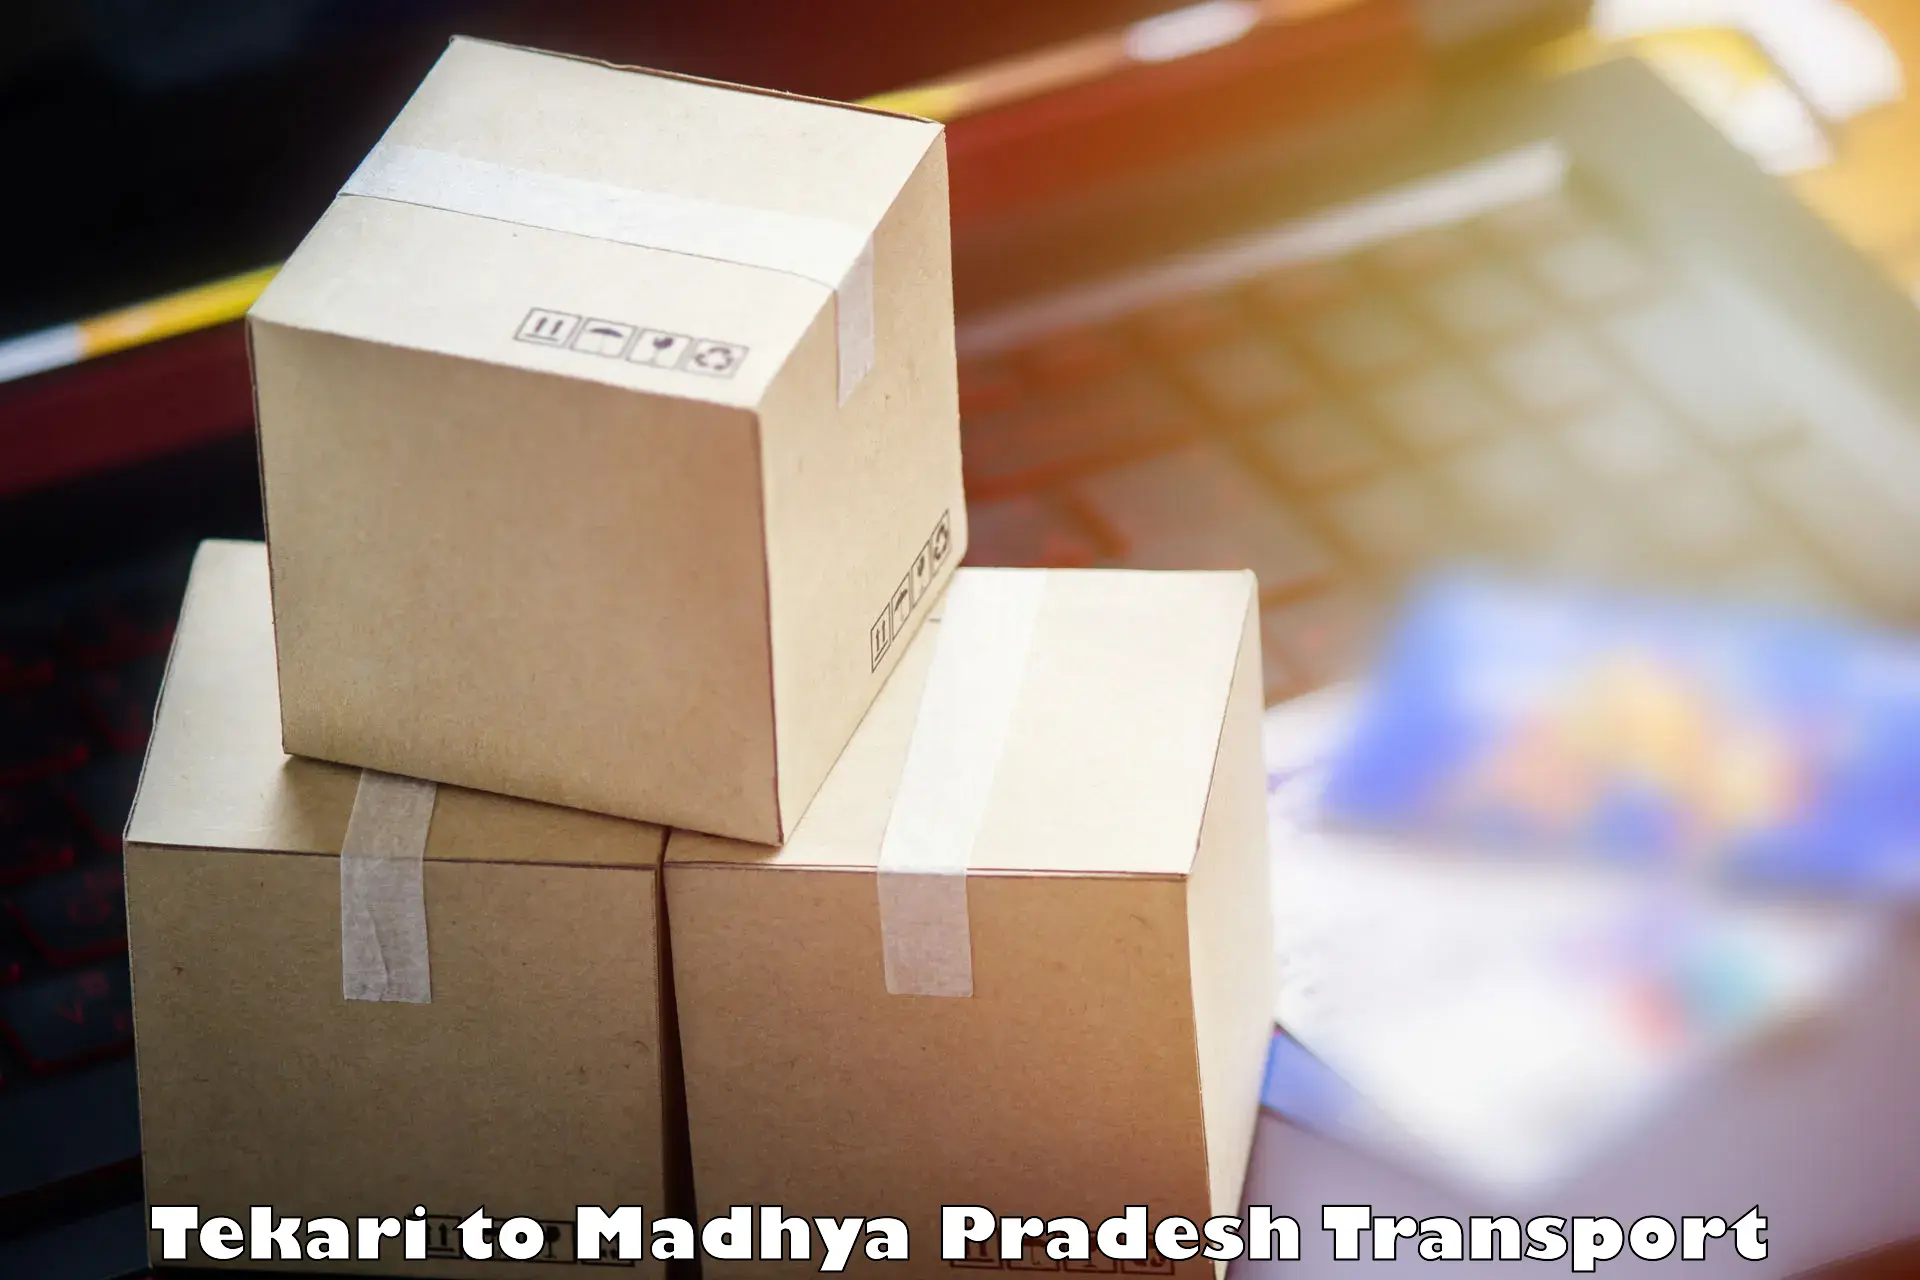 Container transport service Tekari to Gwalior